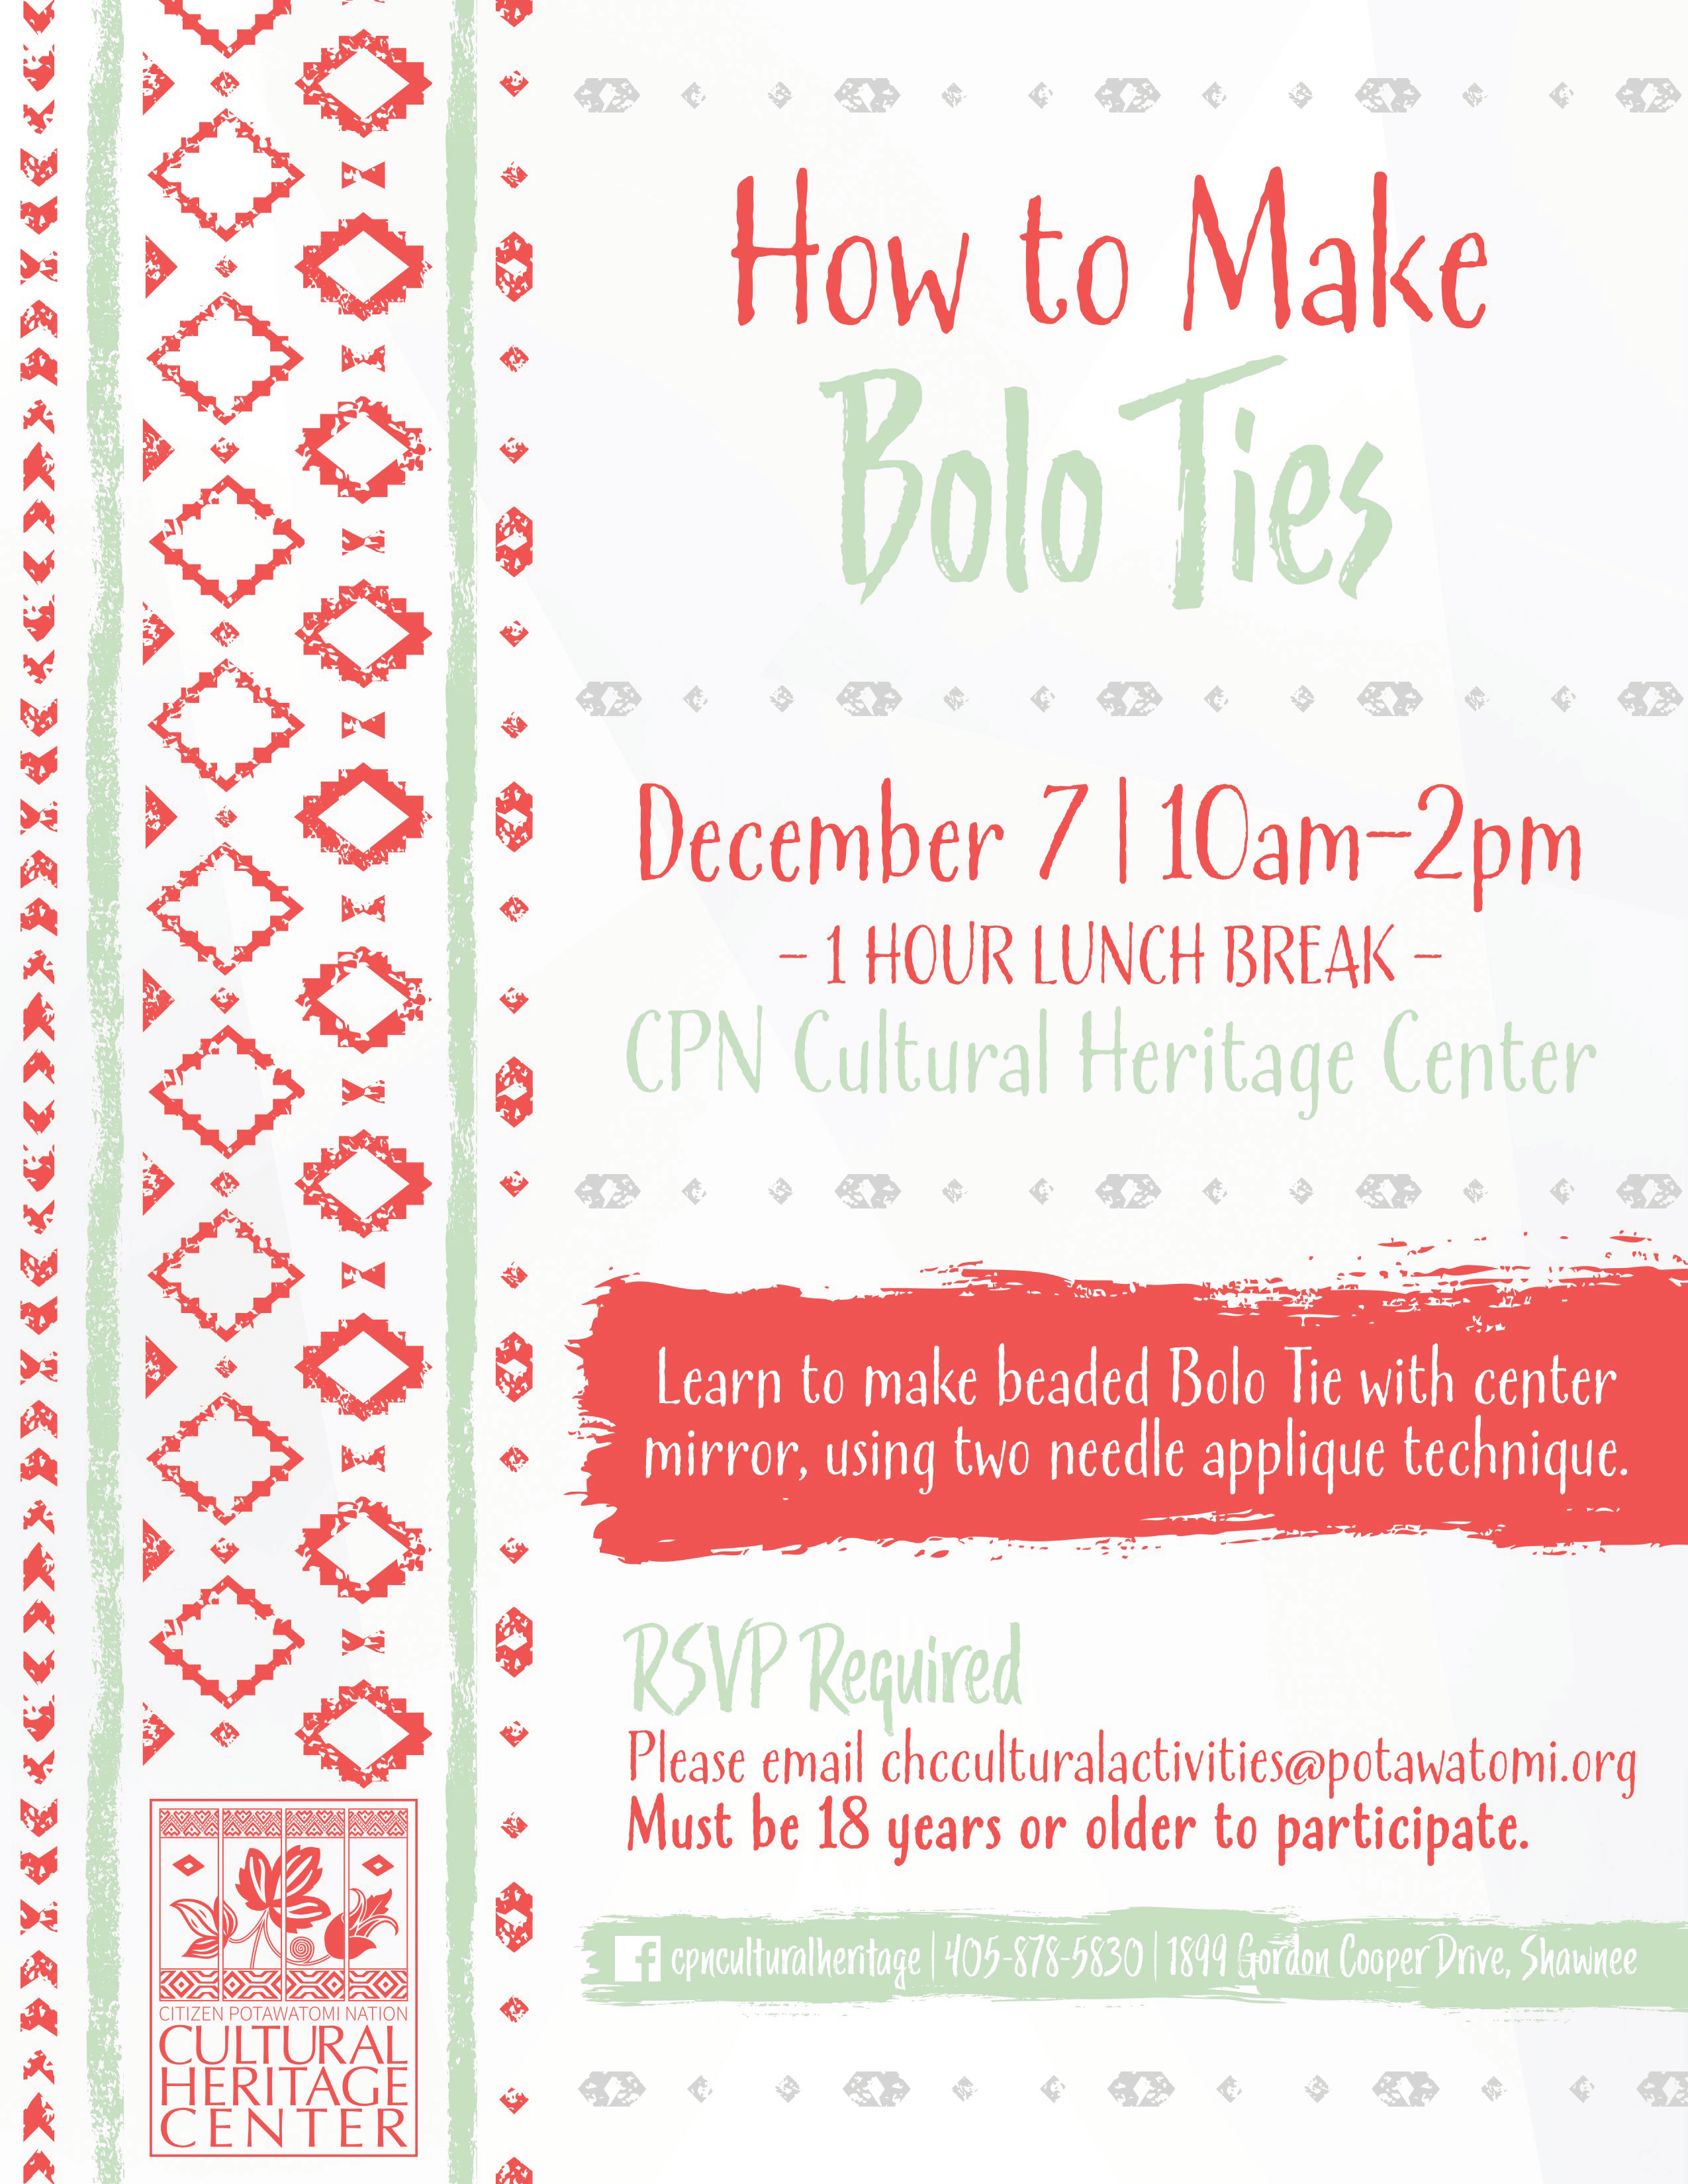 Sage green and bright red geometric designs frame text describing a class on how to make a bolo tie on December 7, 2022, at the Cultural Heritage Center.